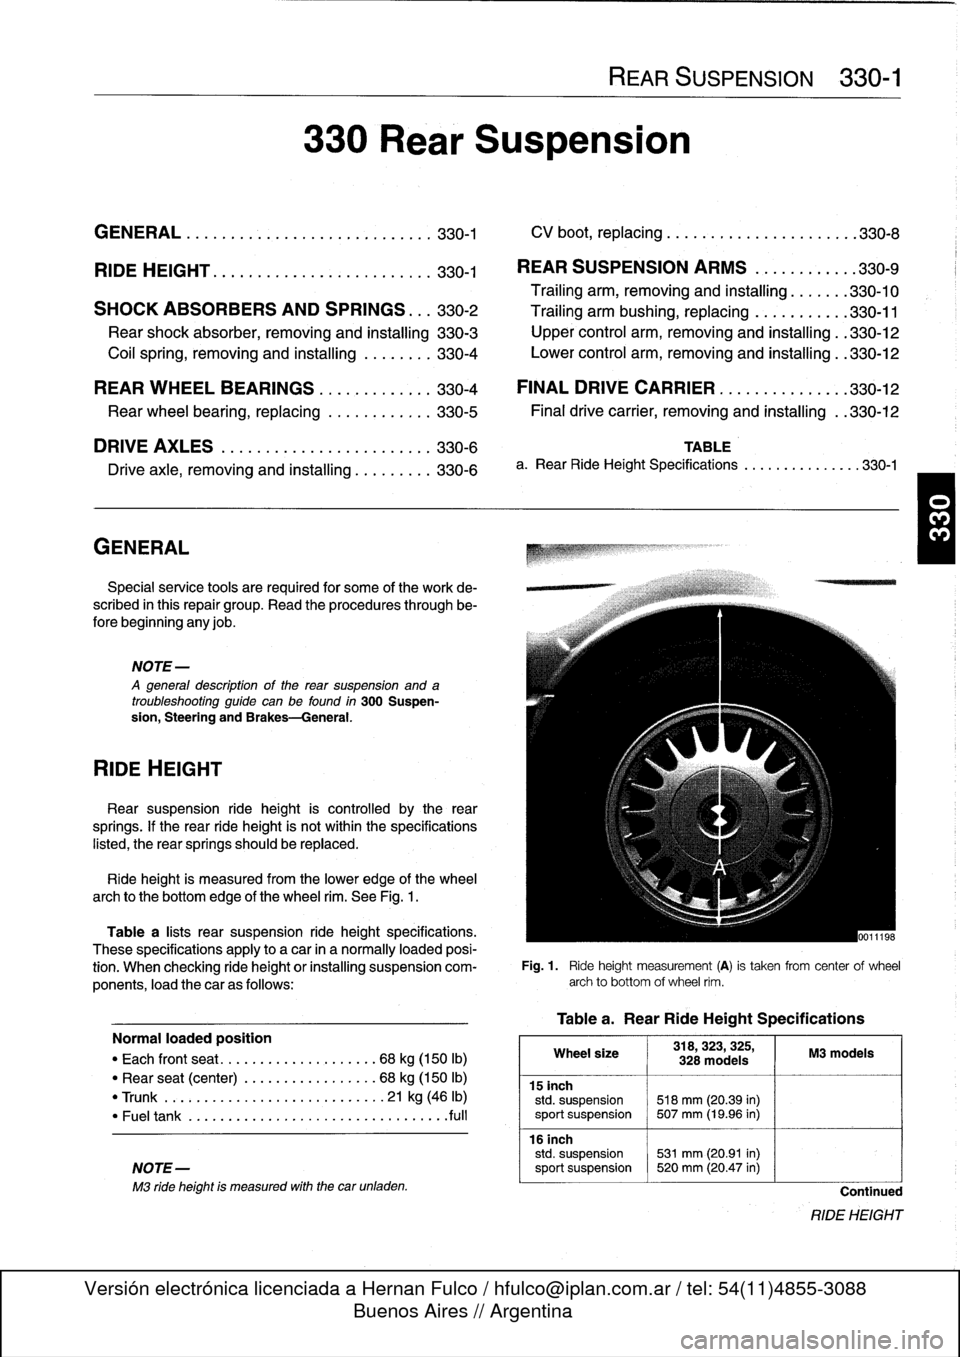 BMW 323i 1997 E36 Owners Guide 
GENERAL
.......
.
.
.
.
.
.
.
.
.
.......
.
...
.330-1

	

CV
boot,
replacing
........
.
.
.
.........
.
.330-8

RIDE
HEIGHT
....
.
.
.
.
.
...
.
...
.
.
.
.
.
...
.
330-1

	

REAR
SUSPENSION
ARMS
.
